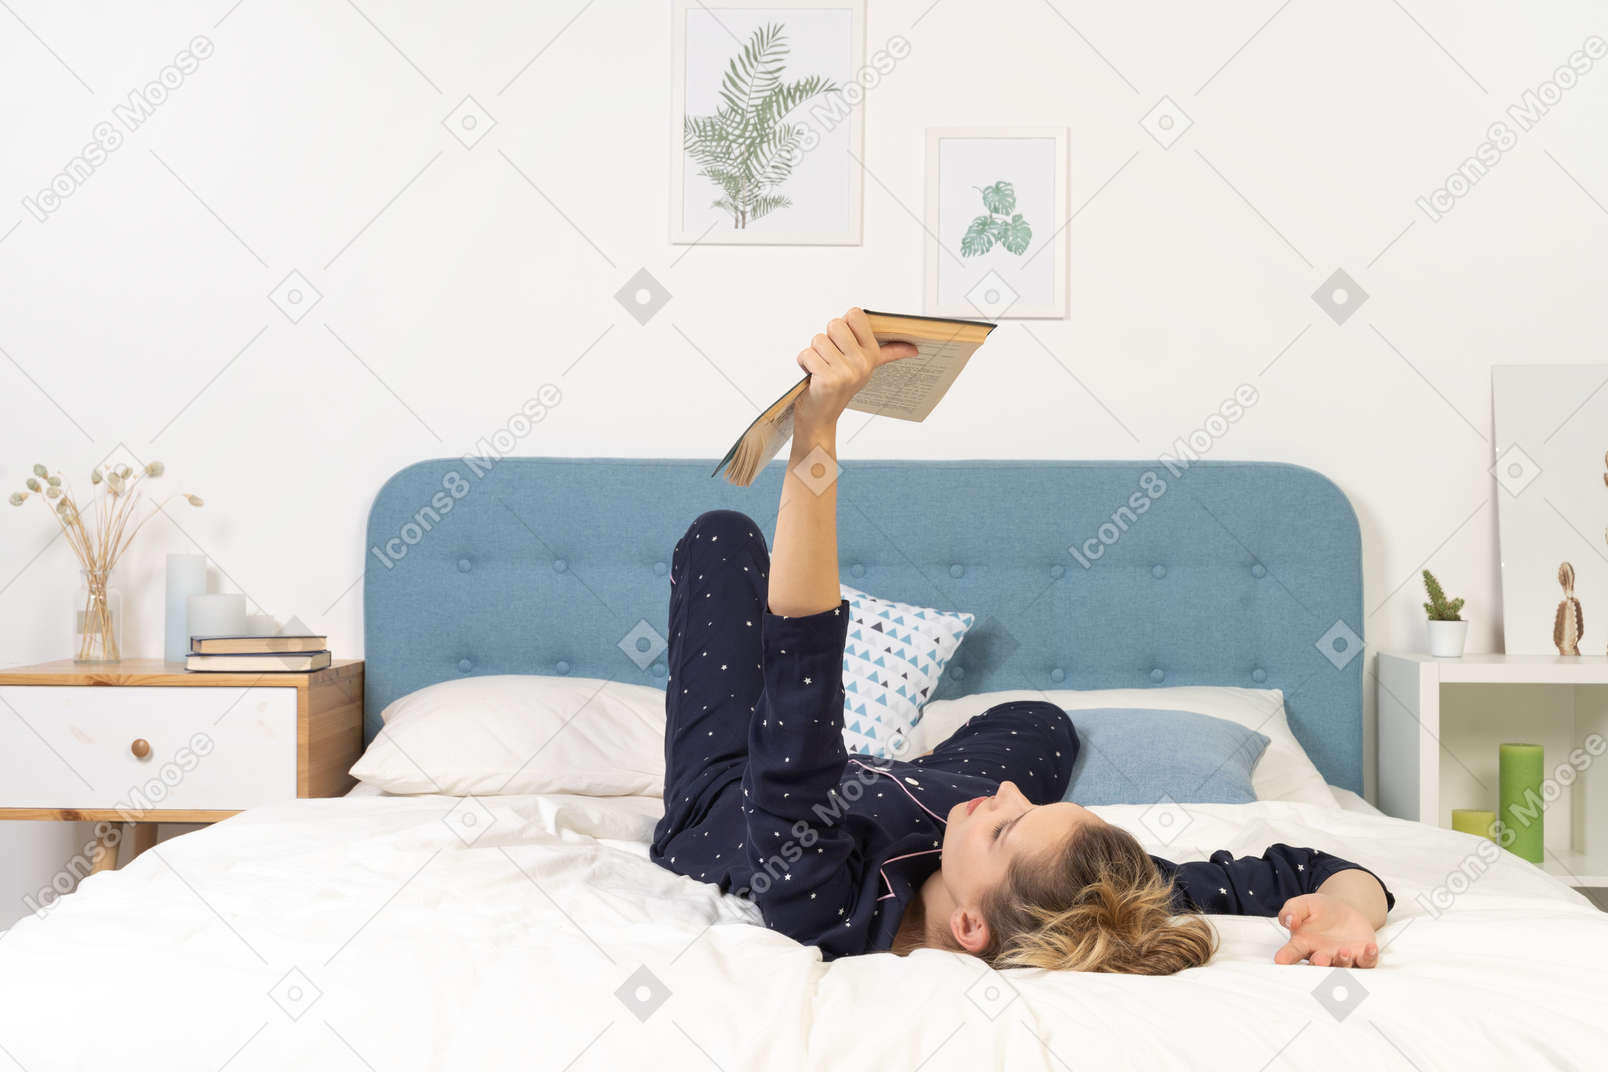 Full-length of a bored young lady trying to read book in bed